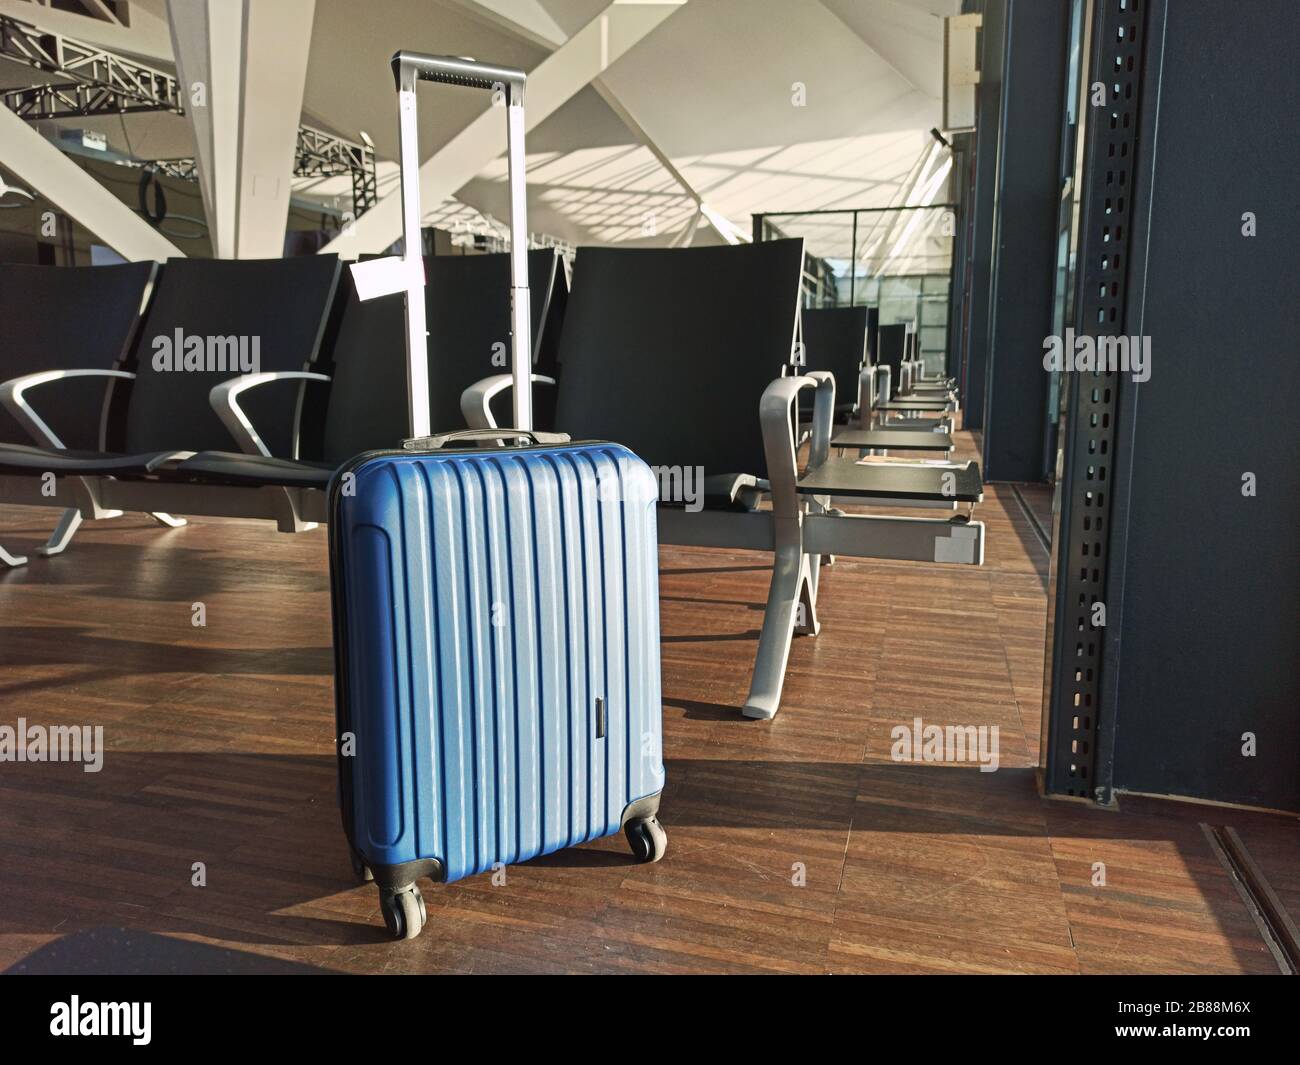 Blue suitcase in an empty airport. Waiting area Flight delay cancellation. Travel and vacation concept. Coronavirus COVID19 quarantine Stock Photo